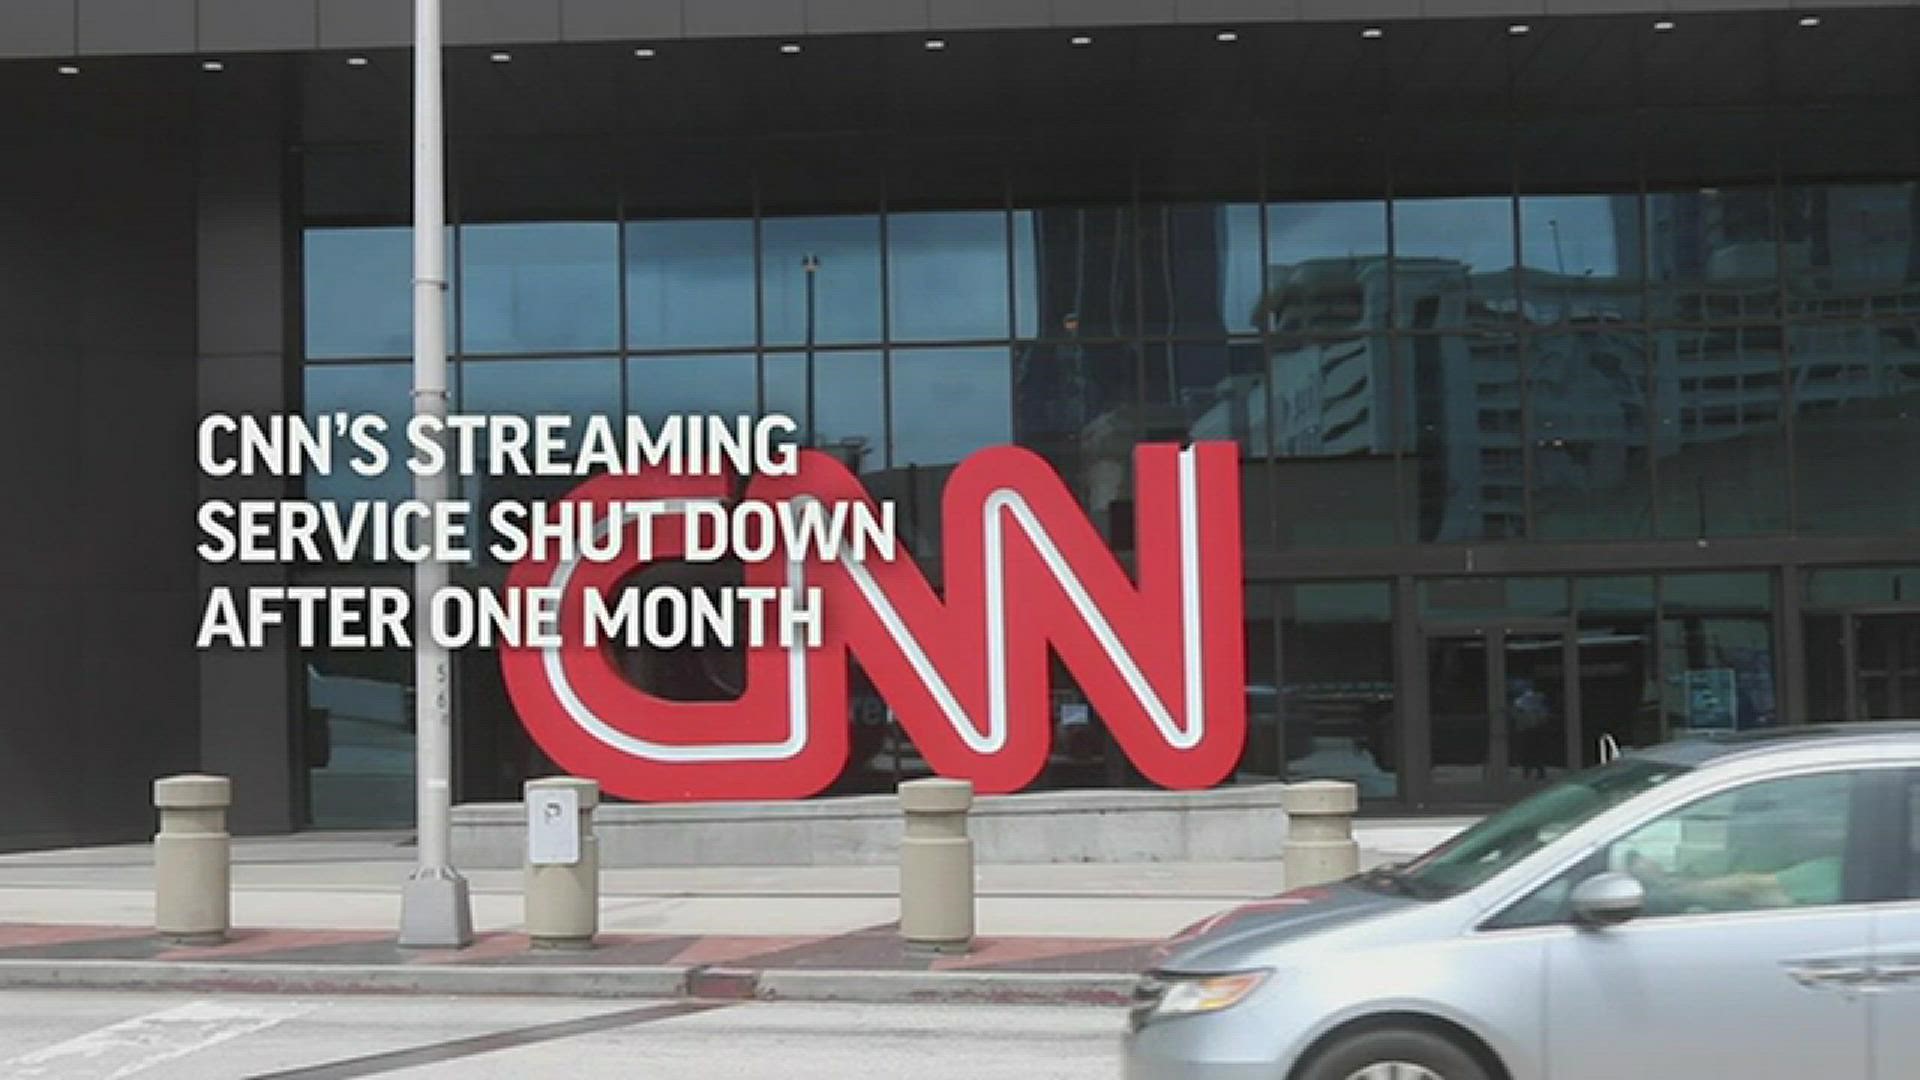 There were $250 million in costs and some 500 employees assigned to building out CNN+. It's being shut down after just one month.